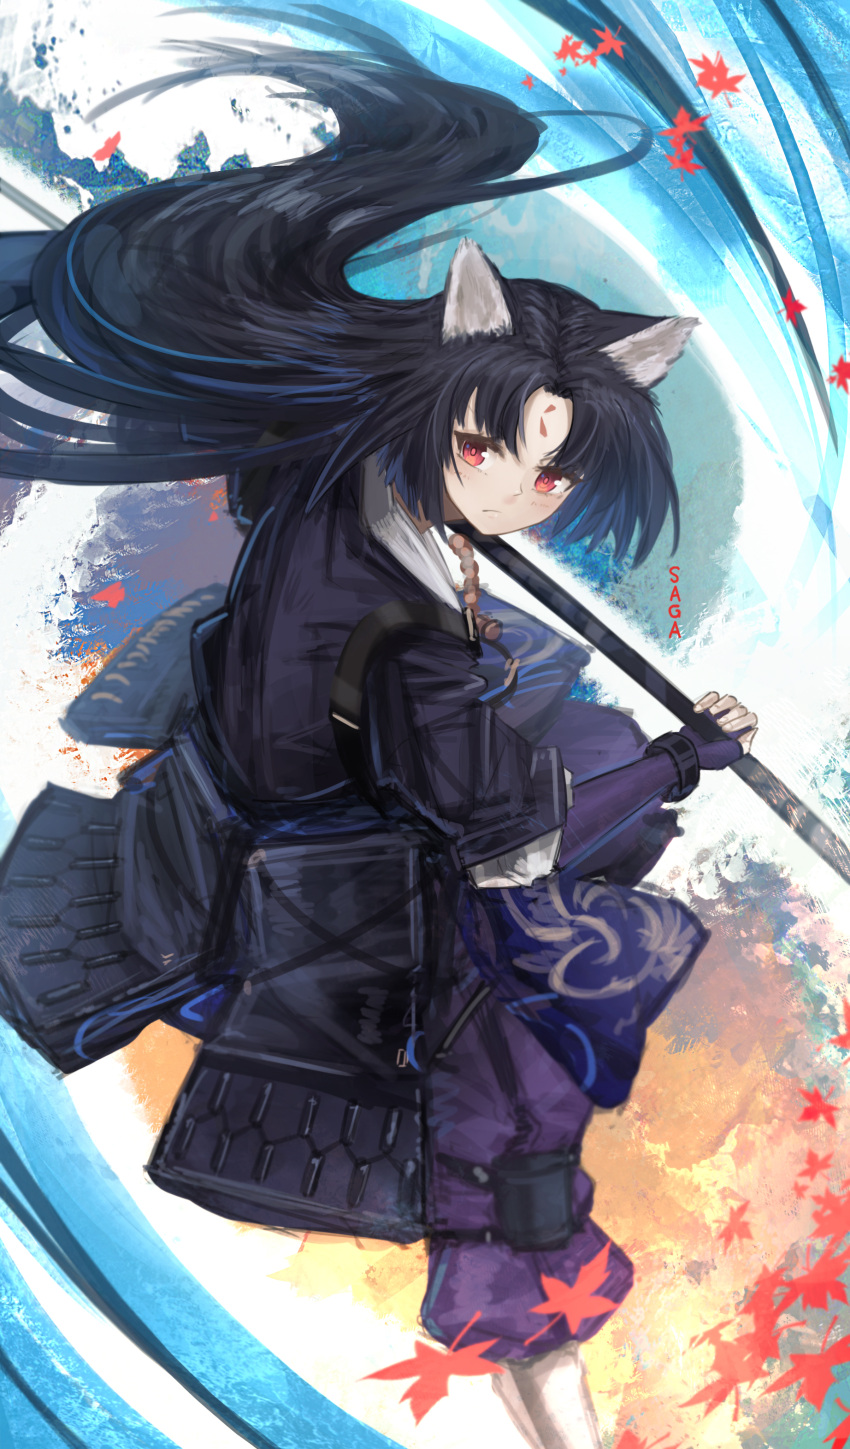 1girl abstract_background absurdres animal_ears arknights autumn_leaves bangs black_gloves black_hair black_kimono blush bracelet closed_mouth dog_ears elbow_gloves facial_mark fingerless_gloves forehead_mark franlol gloves highres holding holding_weapon japanese_clothes jewelry kimono knee_pads leaf leg_up long_hair looking_at_viewer maple_leaf naginata pants parted_bangs polearm purple_pants red_eyes saga_(arknights) solo standing standing_on_one_leg very_long_hair weapon